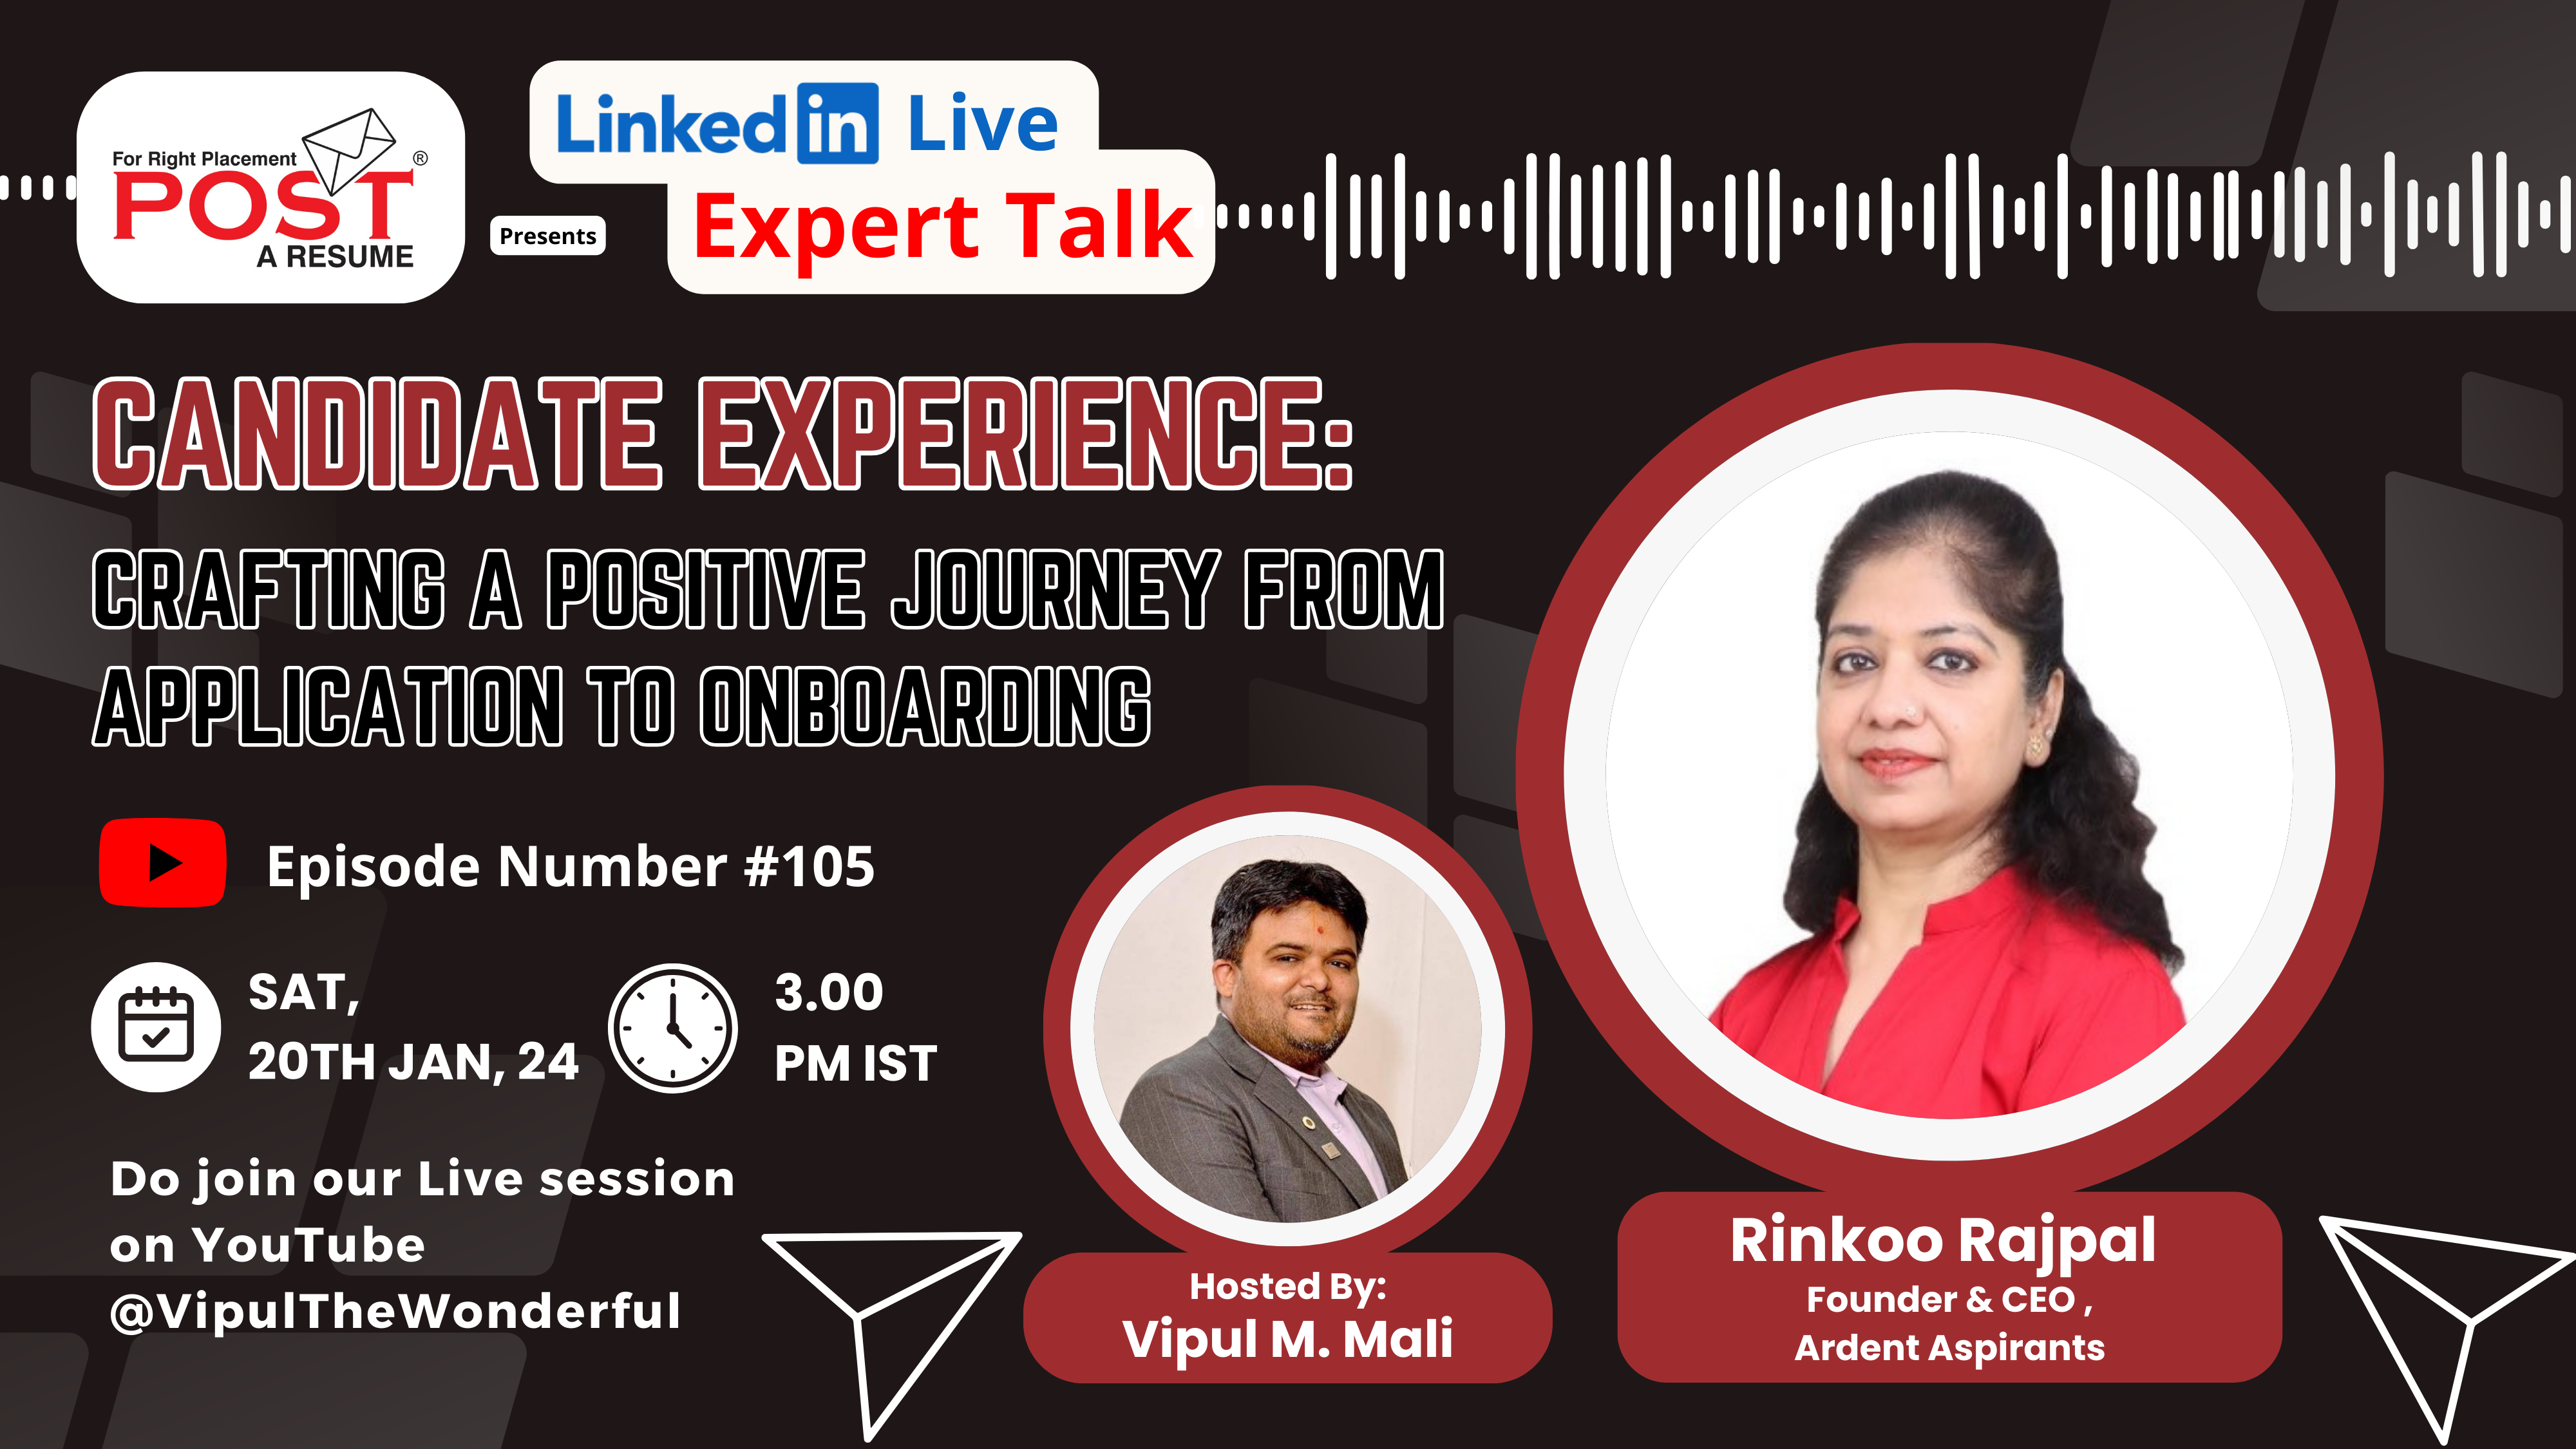 Expert Talk Ep. 105 with Rinkoo Rajpal on Candidate Experience: Crafting a Positive Journey from Application to Onboarding.